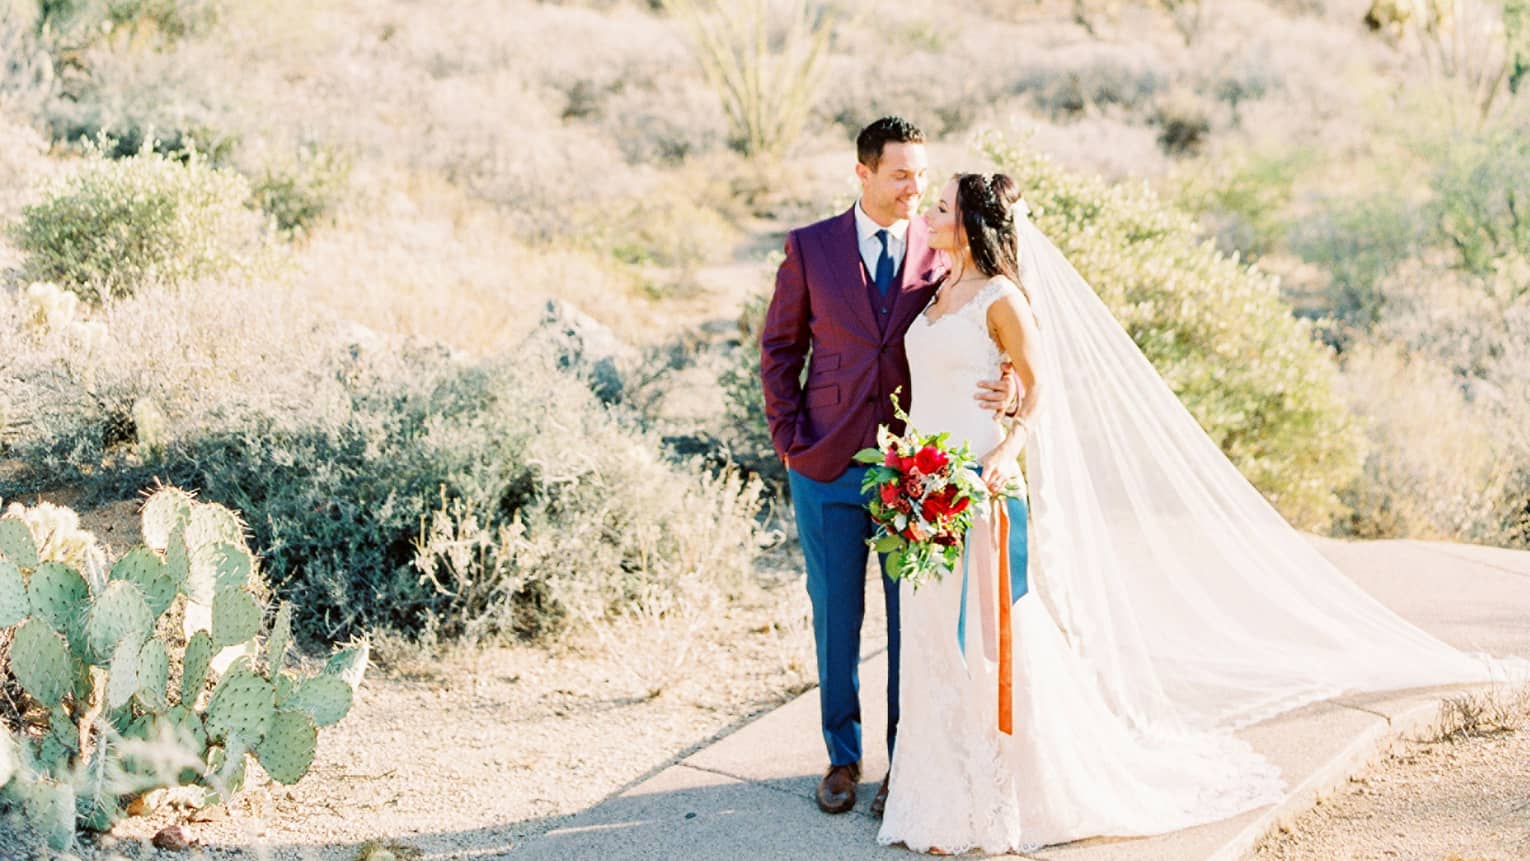 Groom and bride with colourful floral wedding bouquet pose in desert near cactus